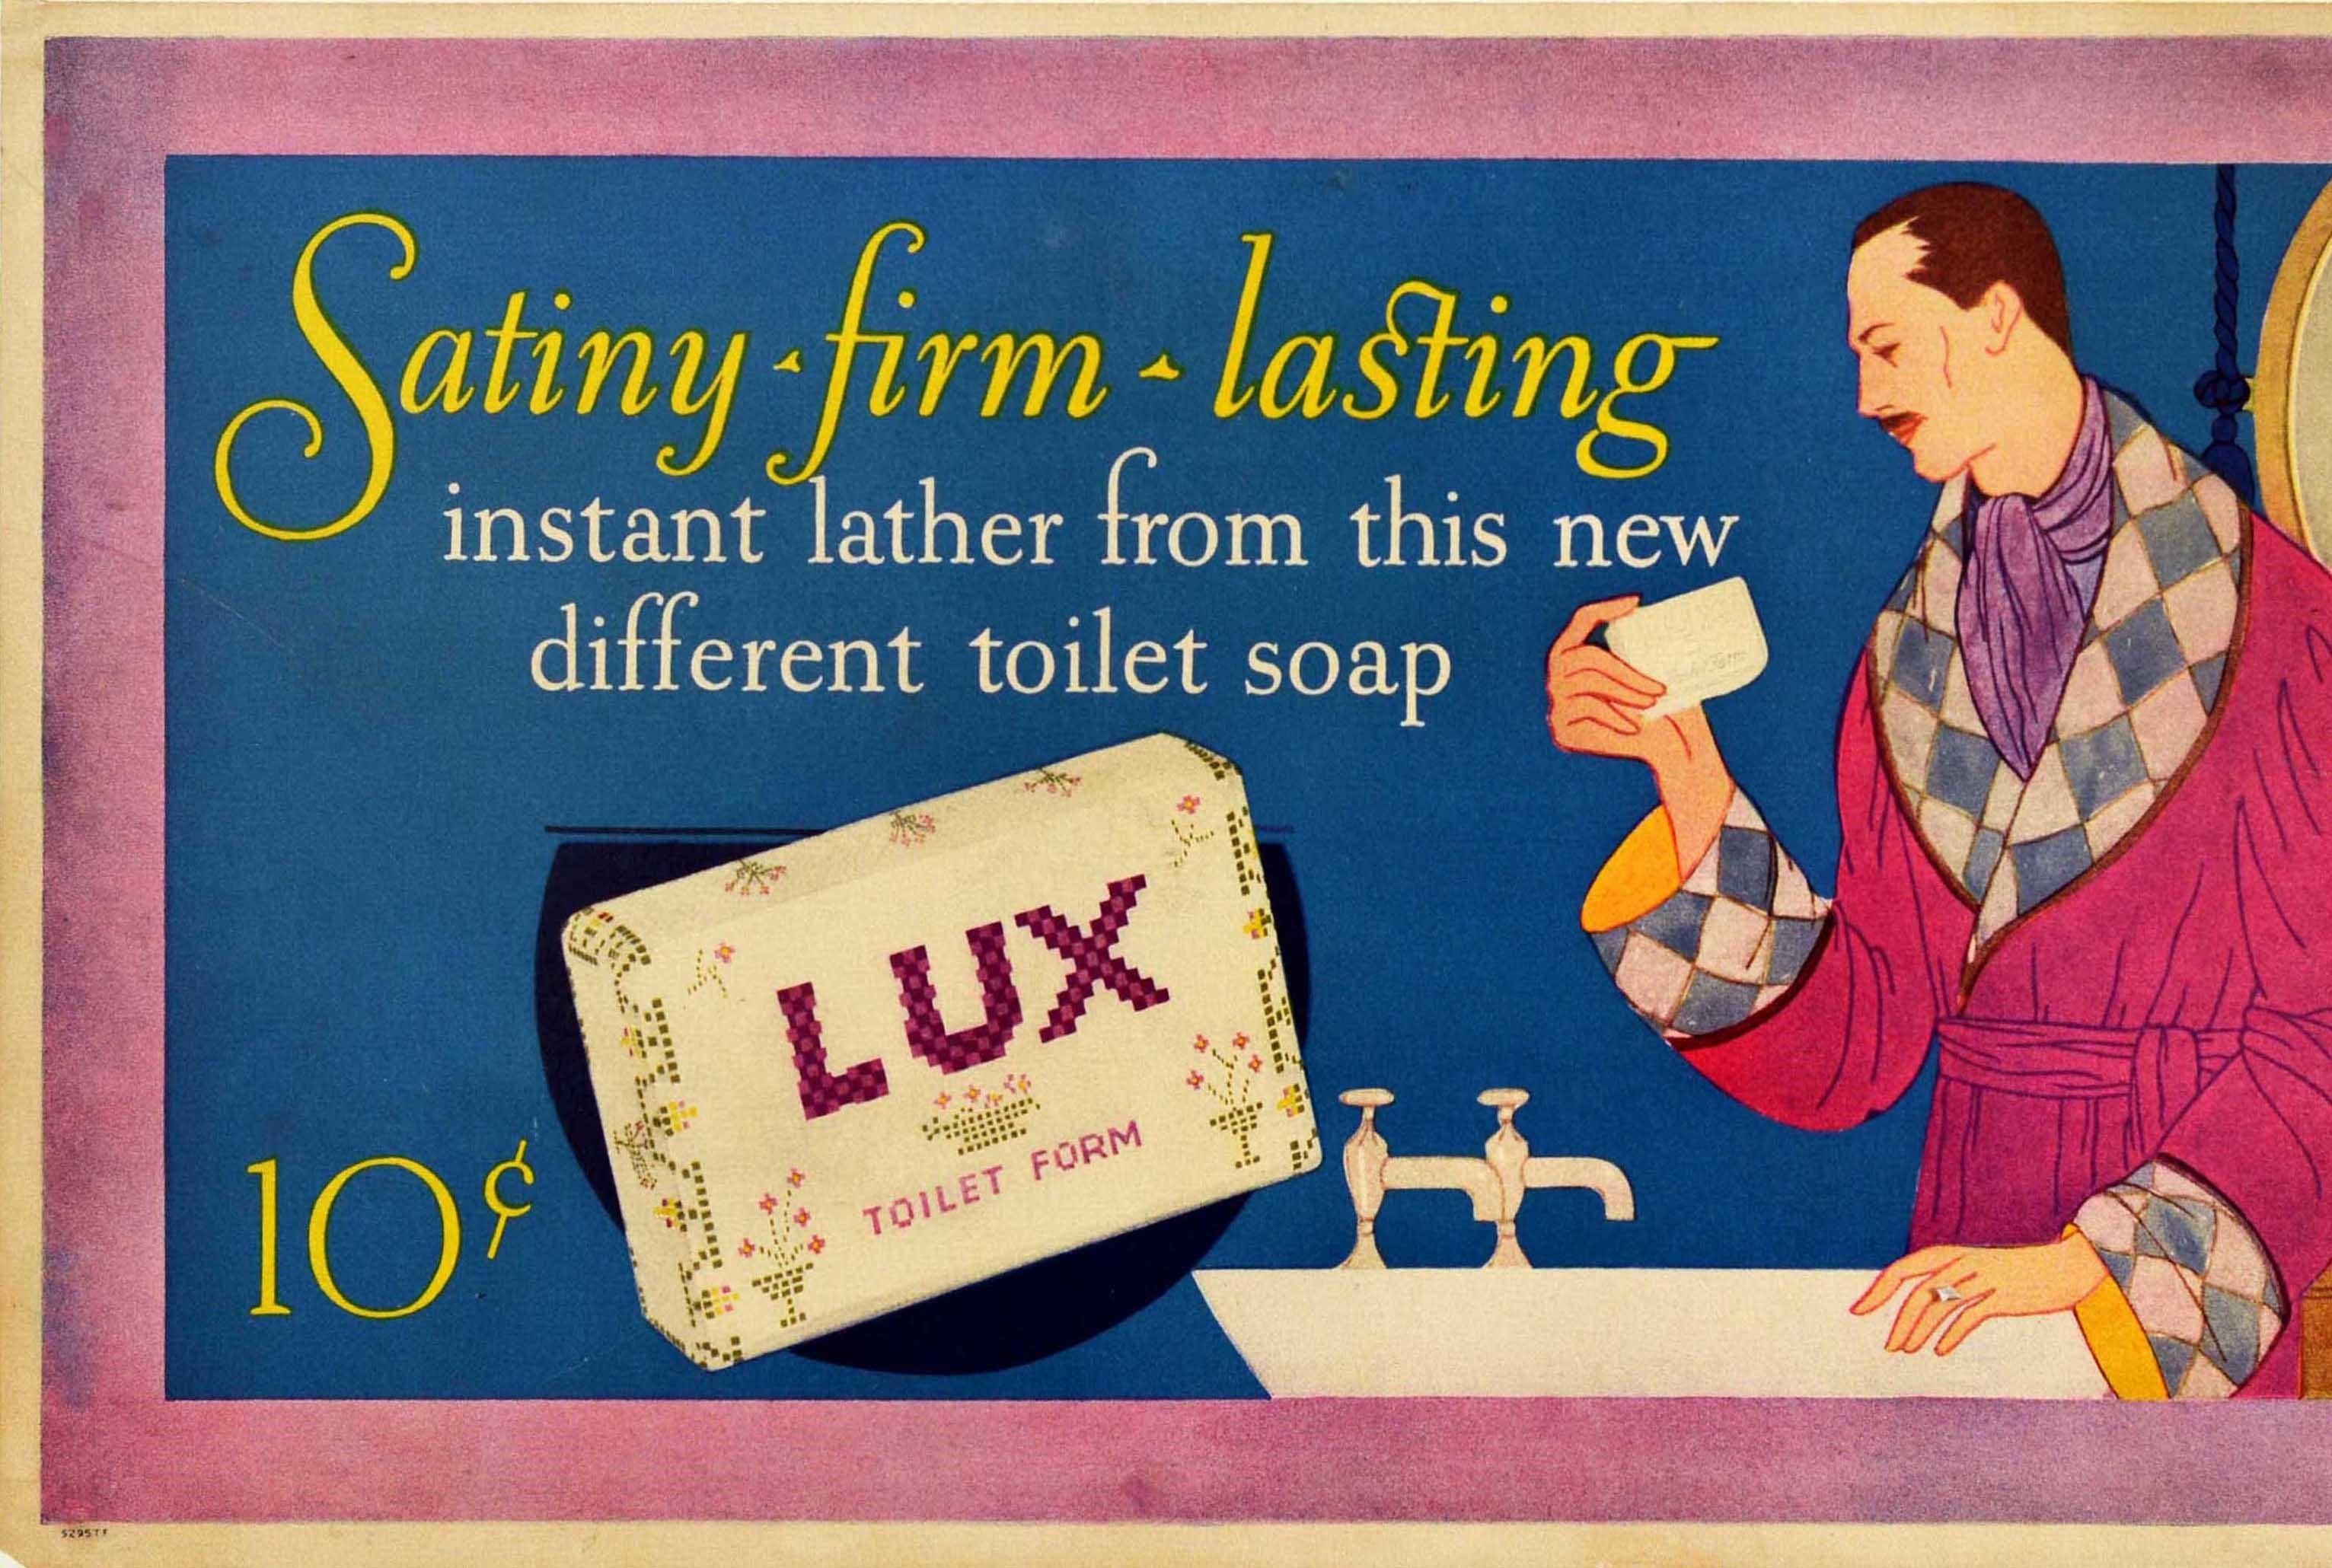 Original vintage advertising poster for Lux soap - Satiny firm lasting instant lather from this new different toilet soap 10c - featuring a colourful design showing a man with brown hair and a moustache, wearing a bathrobe, purple necktie and ring,